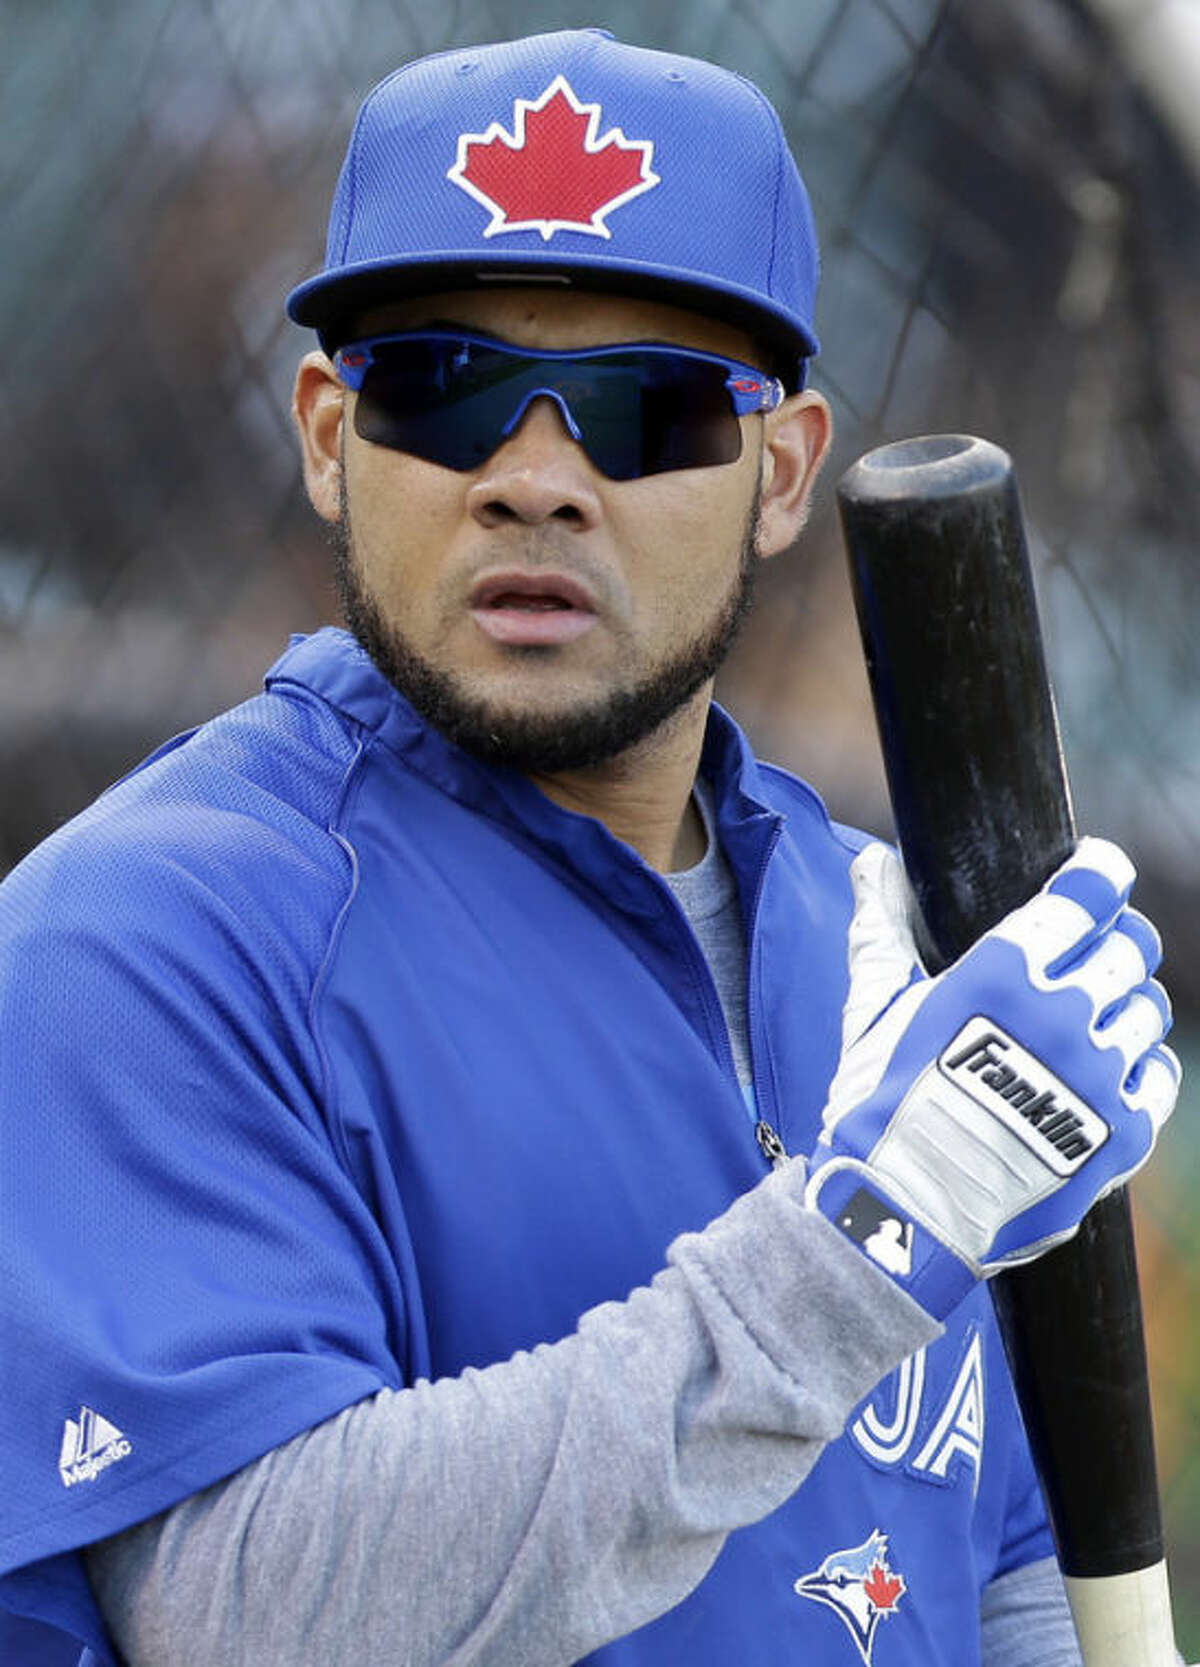 Toronto Blue Jays' Melky Cabrera takes batting practice before a baseball game against the San Francisco Giants on Tuesday, June 4, 2013 in San Francisco. Cabrera wants everyone to know just how sorry he is. Sorry for cheating, sorry for lying, sorry for letting down the San Francisco Giants and their supportive city. Cabrera returned to AT&T Park with Toronto on Tuesday night for the first time since receiving a 50-game suspension last Aug. 15 following a positive testosterone test. A person familiar with the case tells The Associated Press Tuesday June 4, 2013 that the founder of a Miami anti-aging clinic has agreed to talk to Major League Baseball about players linked to performance-enhancing drugs. Alex Rodriguez, Ryan Braun, Nelson Cruz and Melky Cabrera are among the players whose names have been tied to the clinic. (AP Photo/Marcio Jose Sanchez)